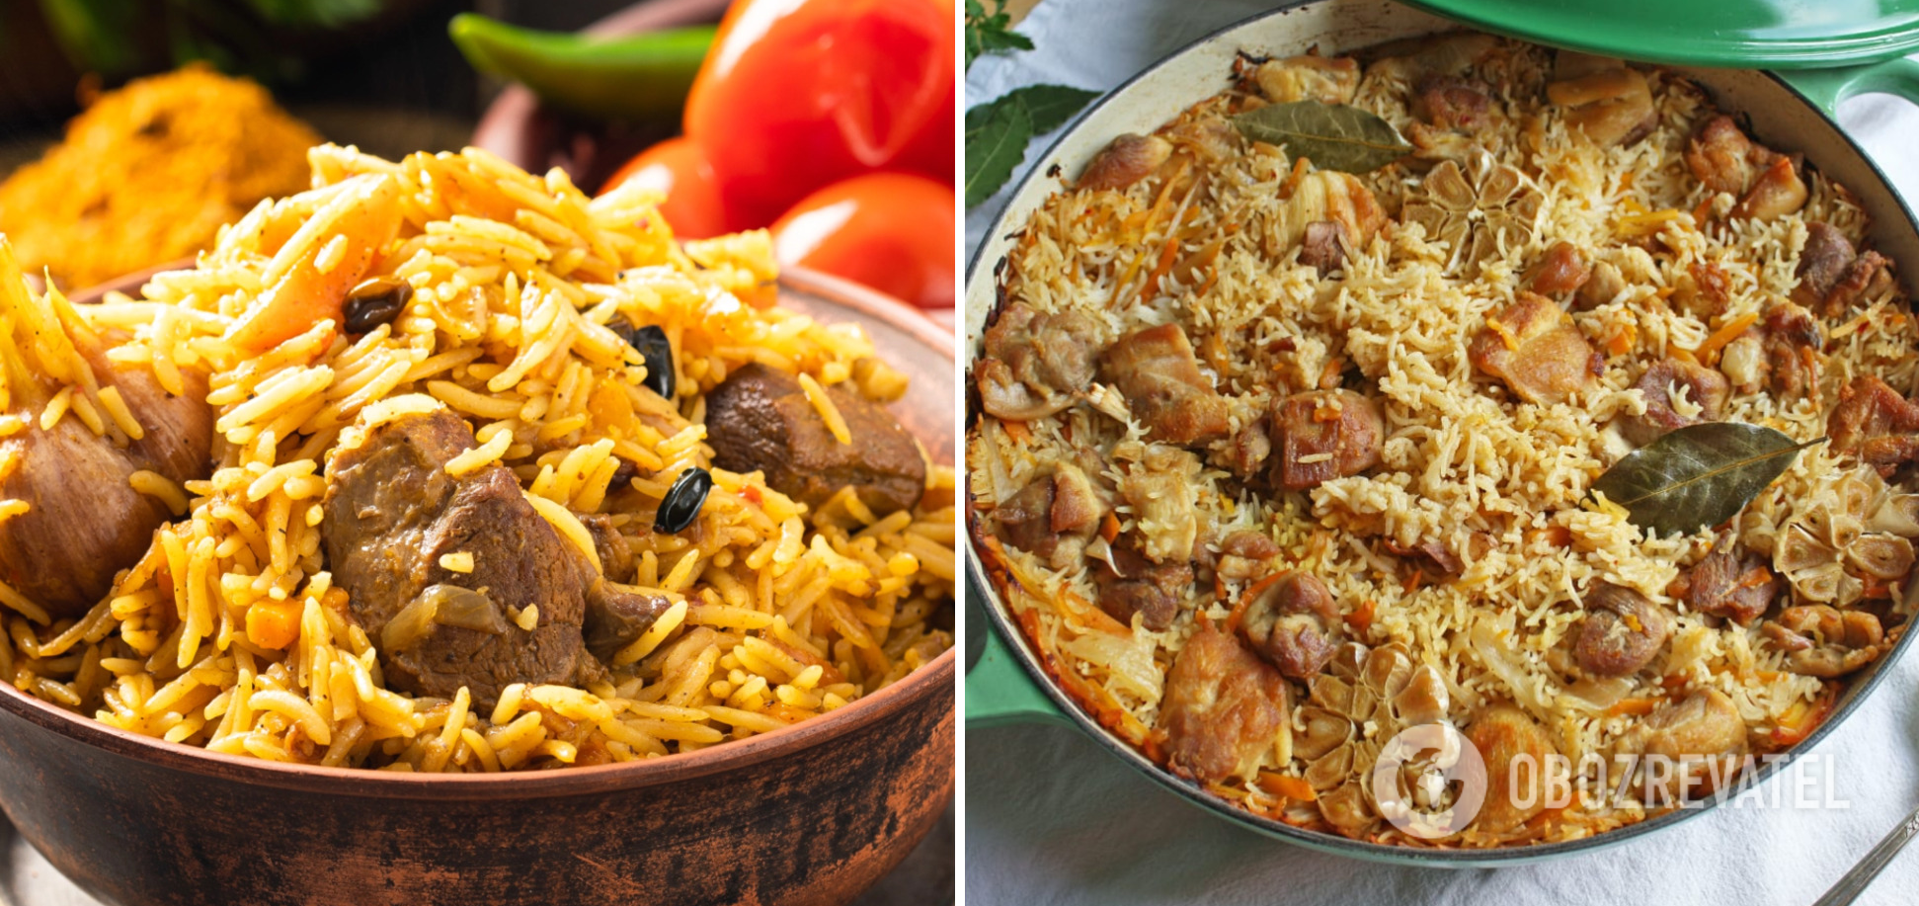 How to cook Uzbek pilaf in a cauldron on the stove